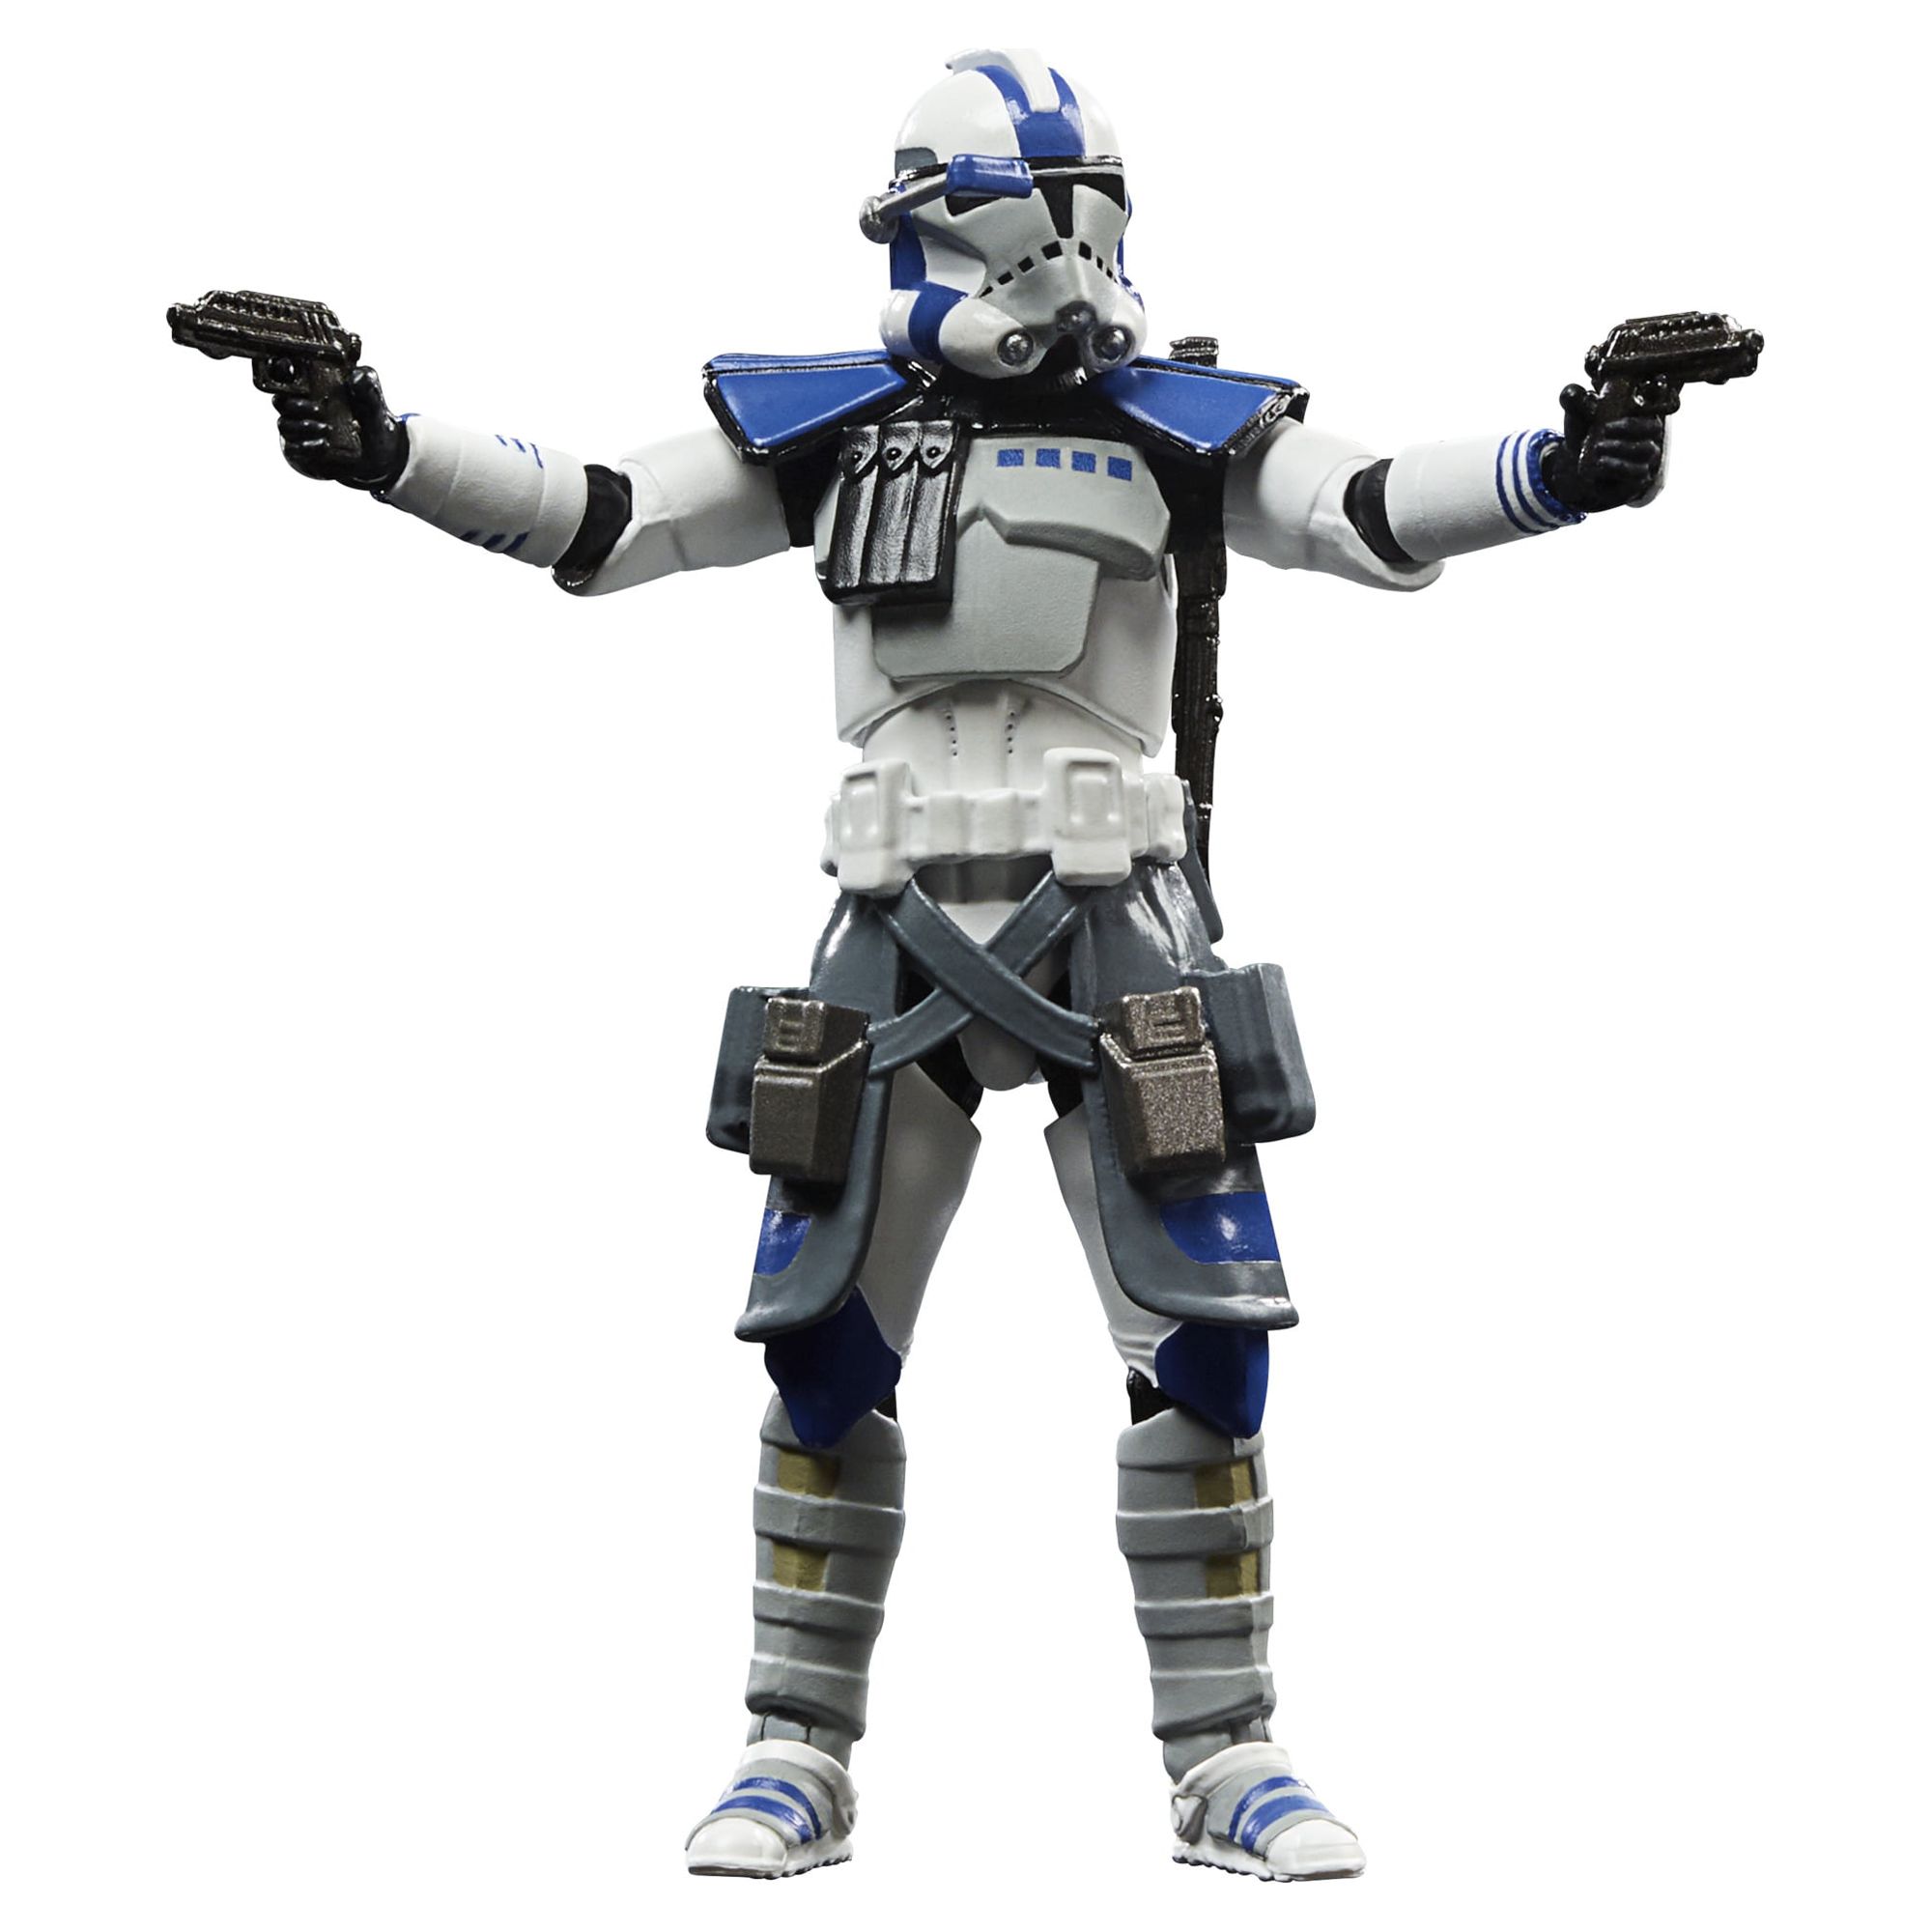 Star Wars: The Clone Wars The Vintage Collection ARC Commander Havoc Kids Toy Action Figure for Boys and Girls Ages 4 5 6 7 8 and Up (3.75”) - image 3 of 10